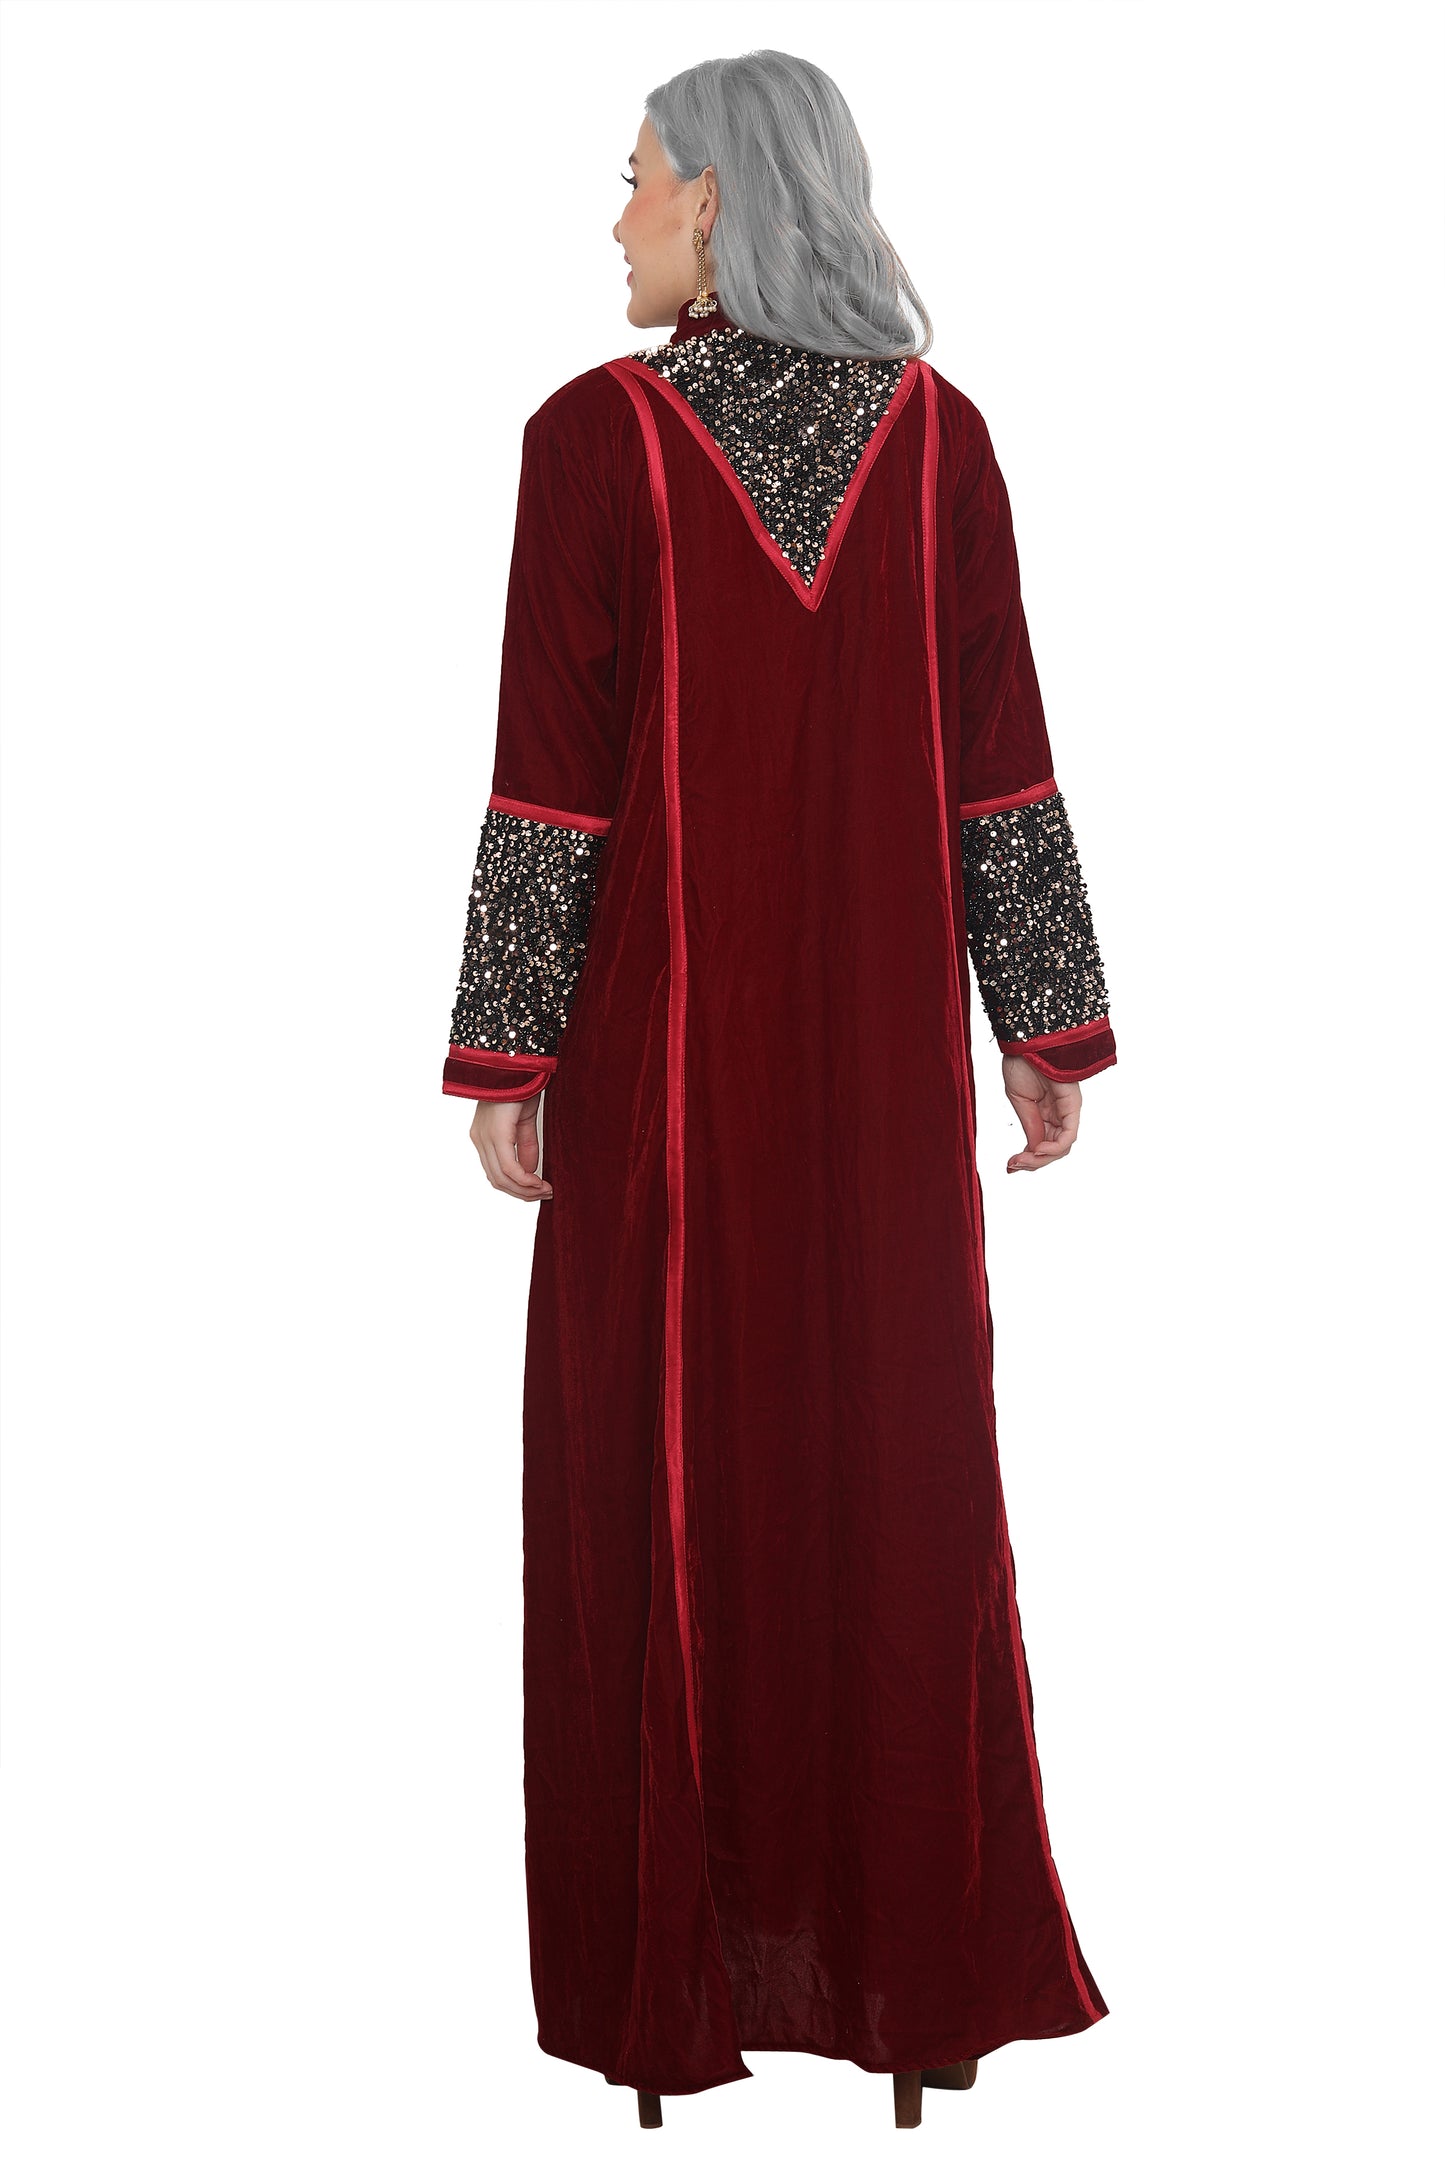 Game of Throne Queen Dress Maroon Gown | Costume - Maxim Creation